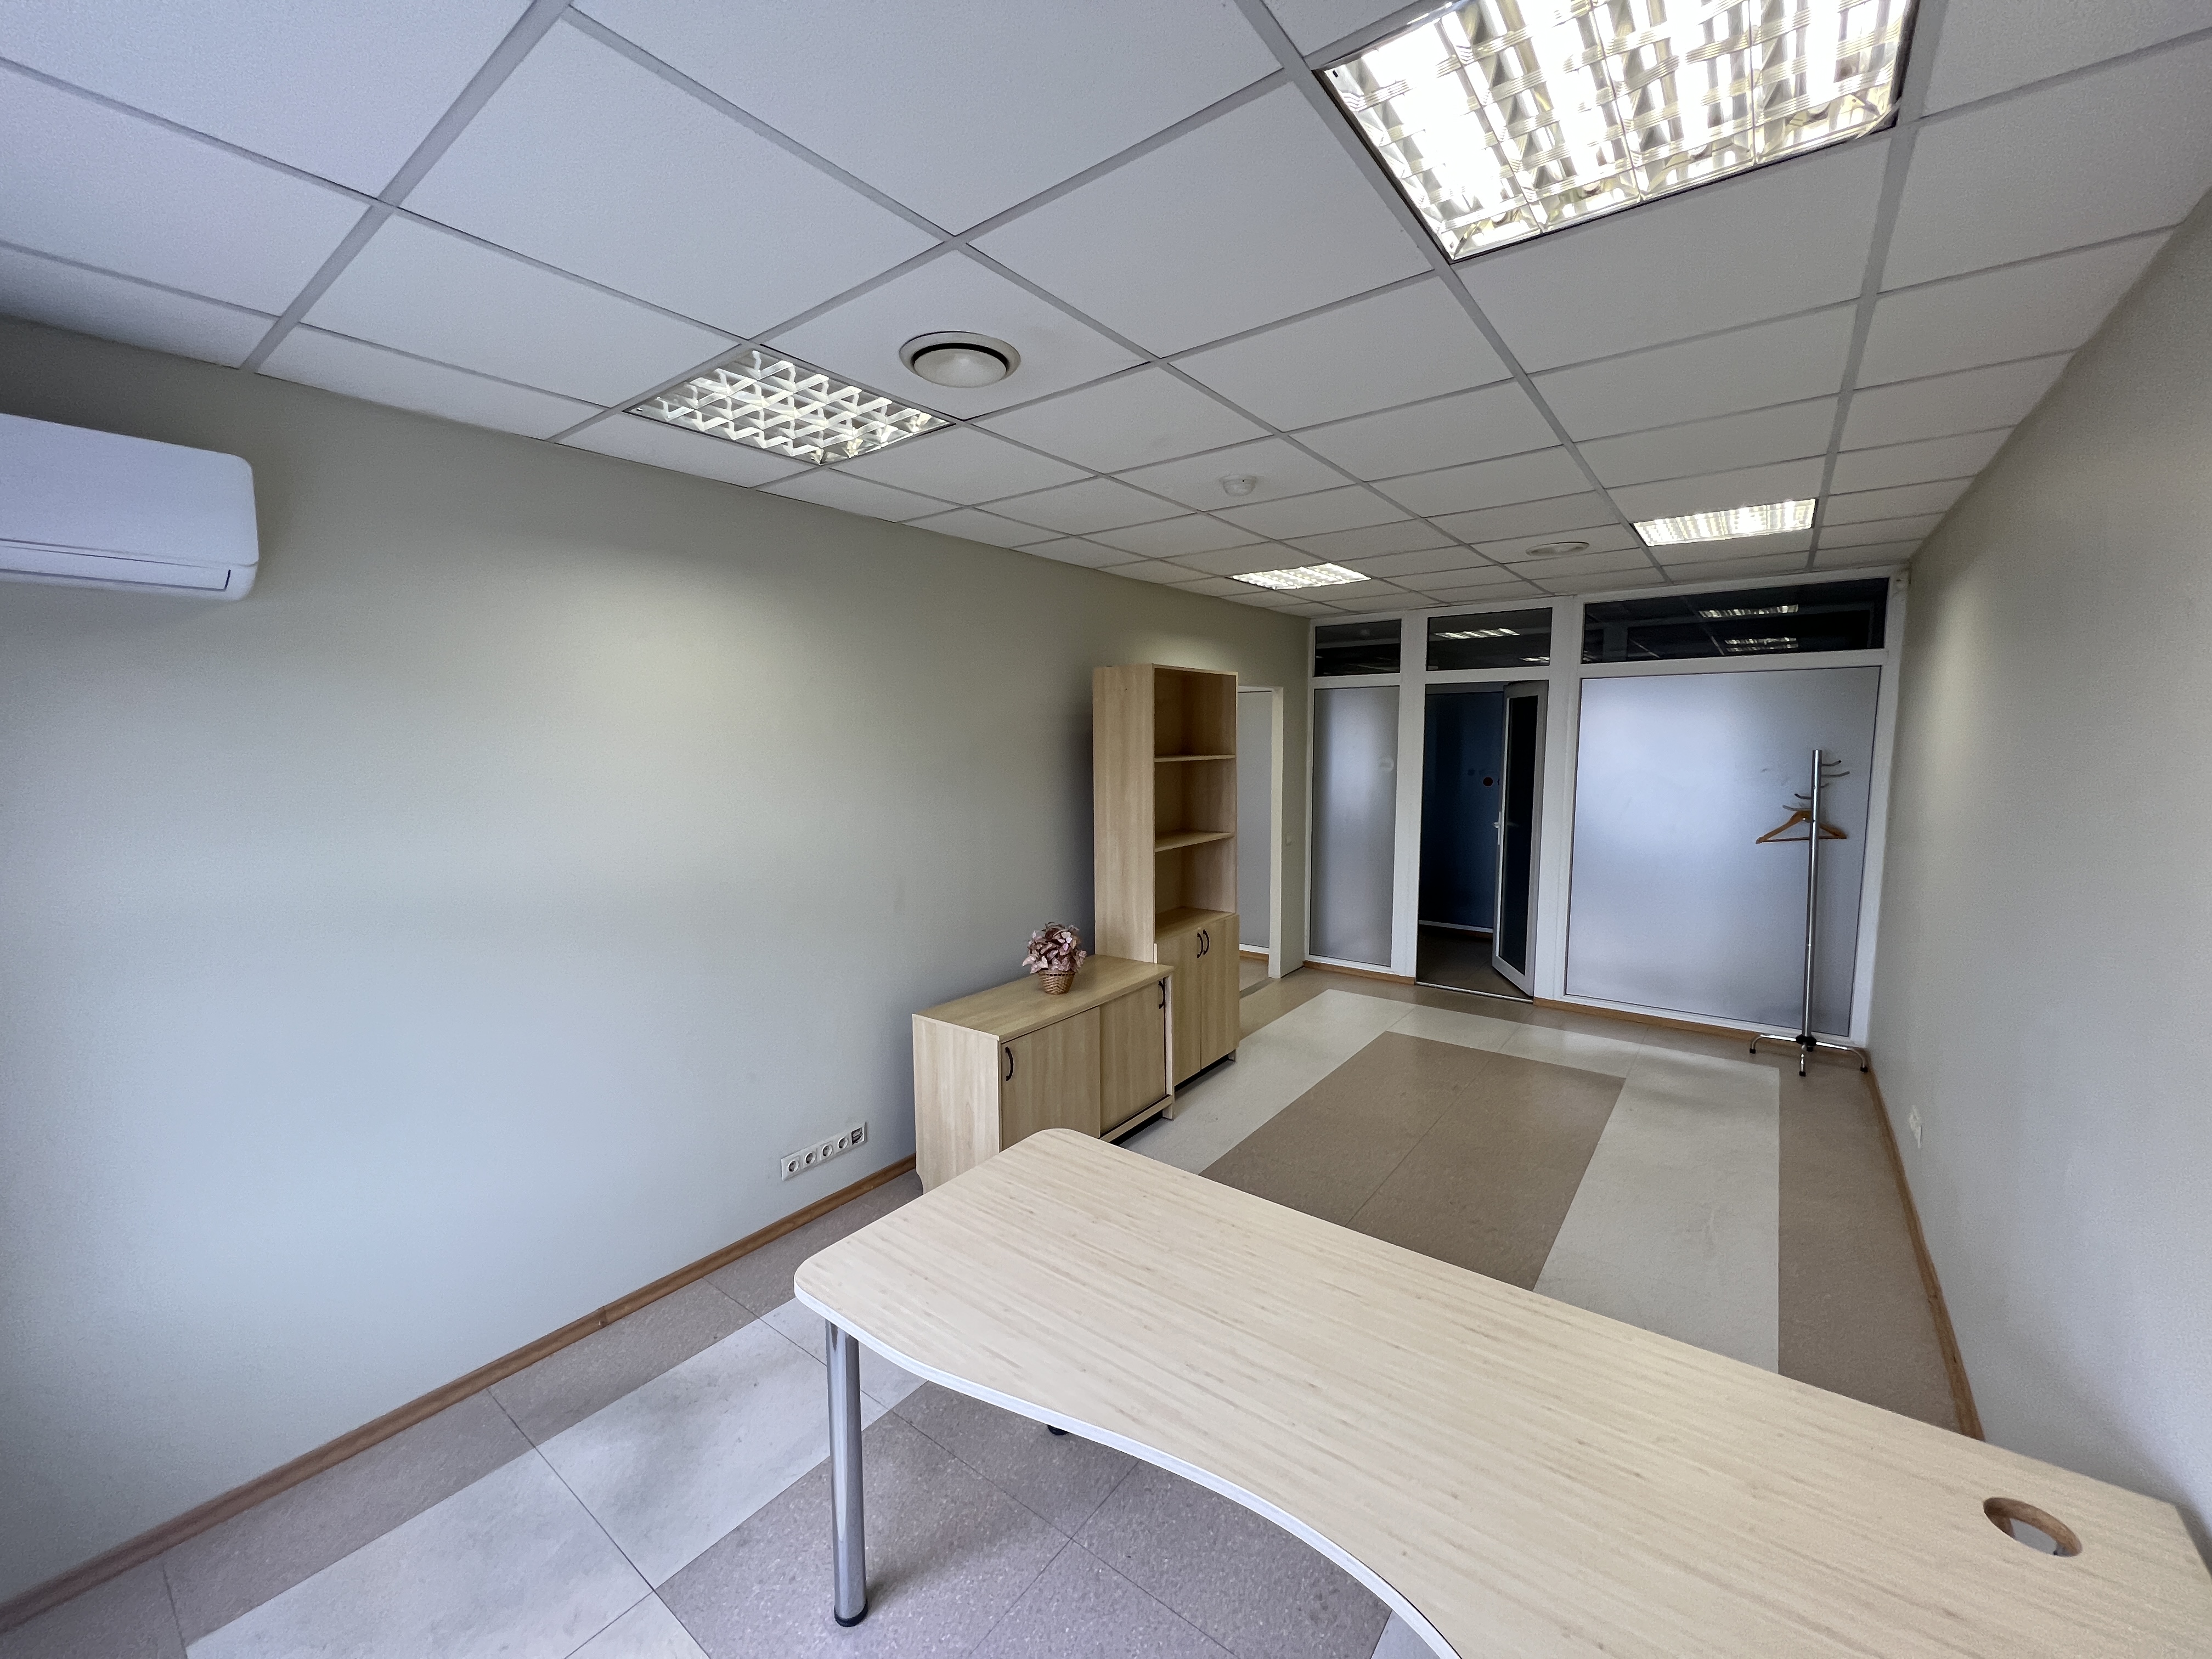 Office for rent, Ozolu street - Image 1